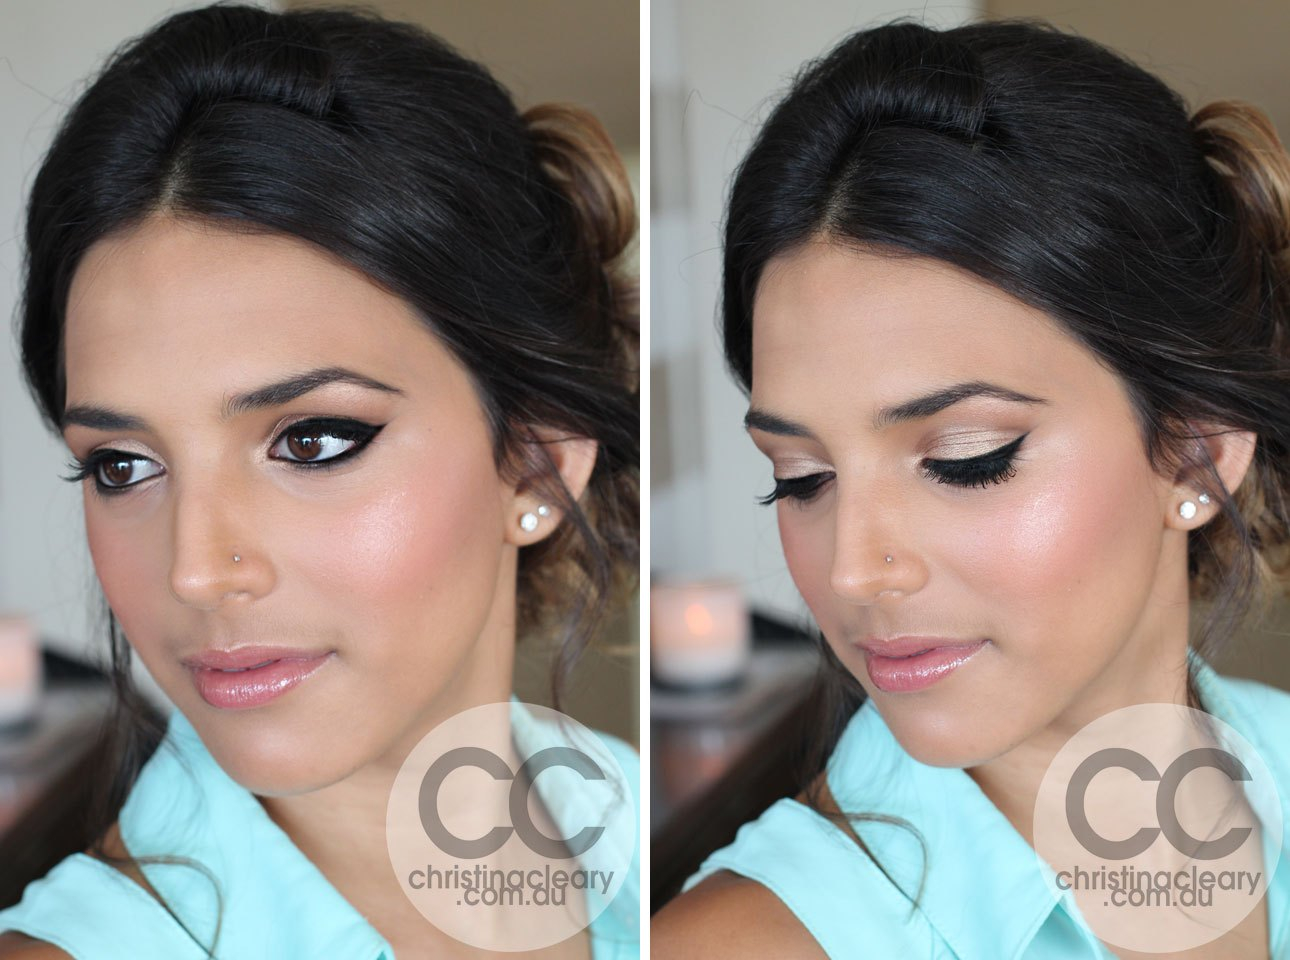 Wedding Makeup Looks For Brunettes With Brown Eyes Wedding Makeup Ideas For Brown Eyes Pin Elena Paladoiu On Makeup